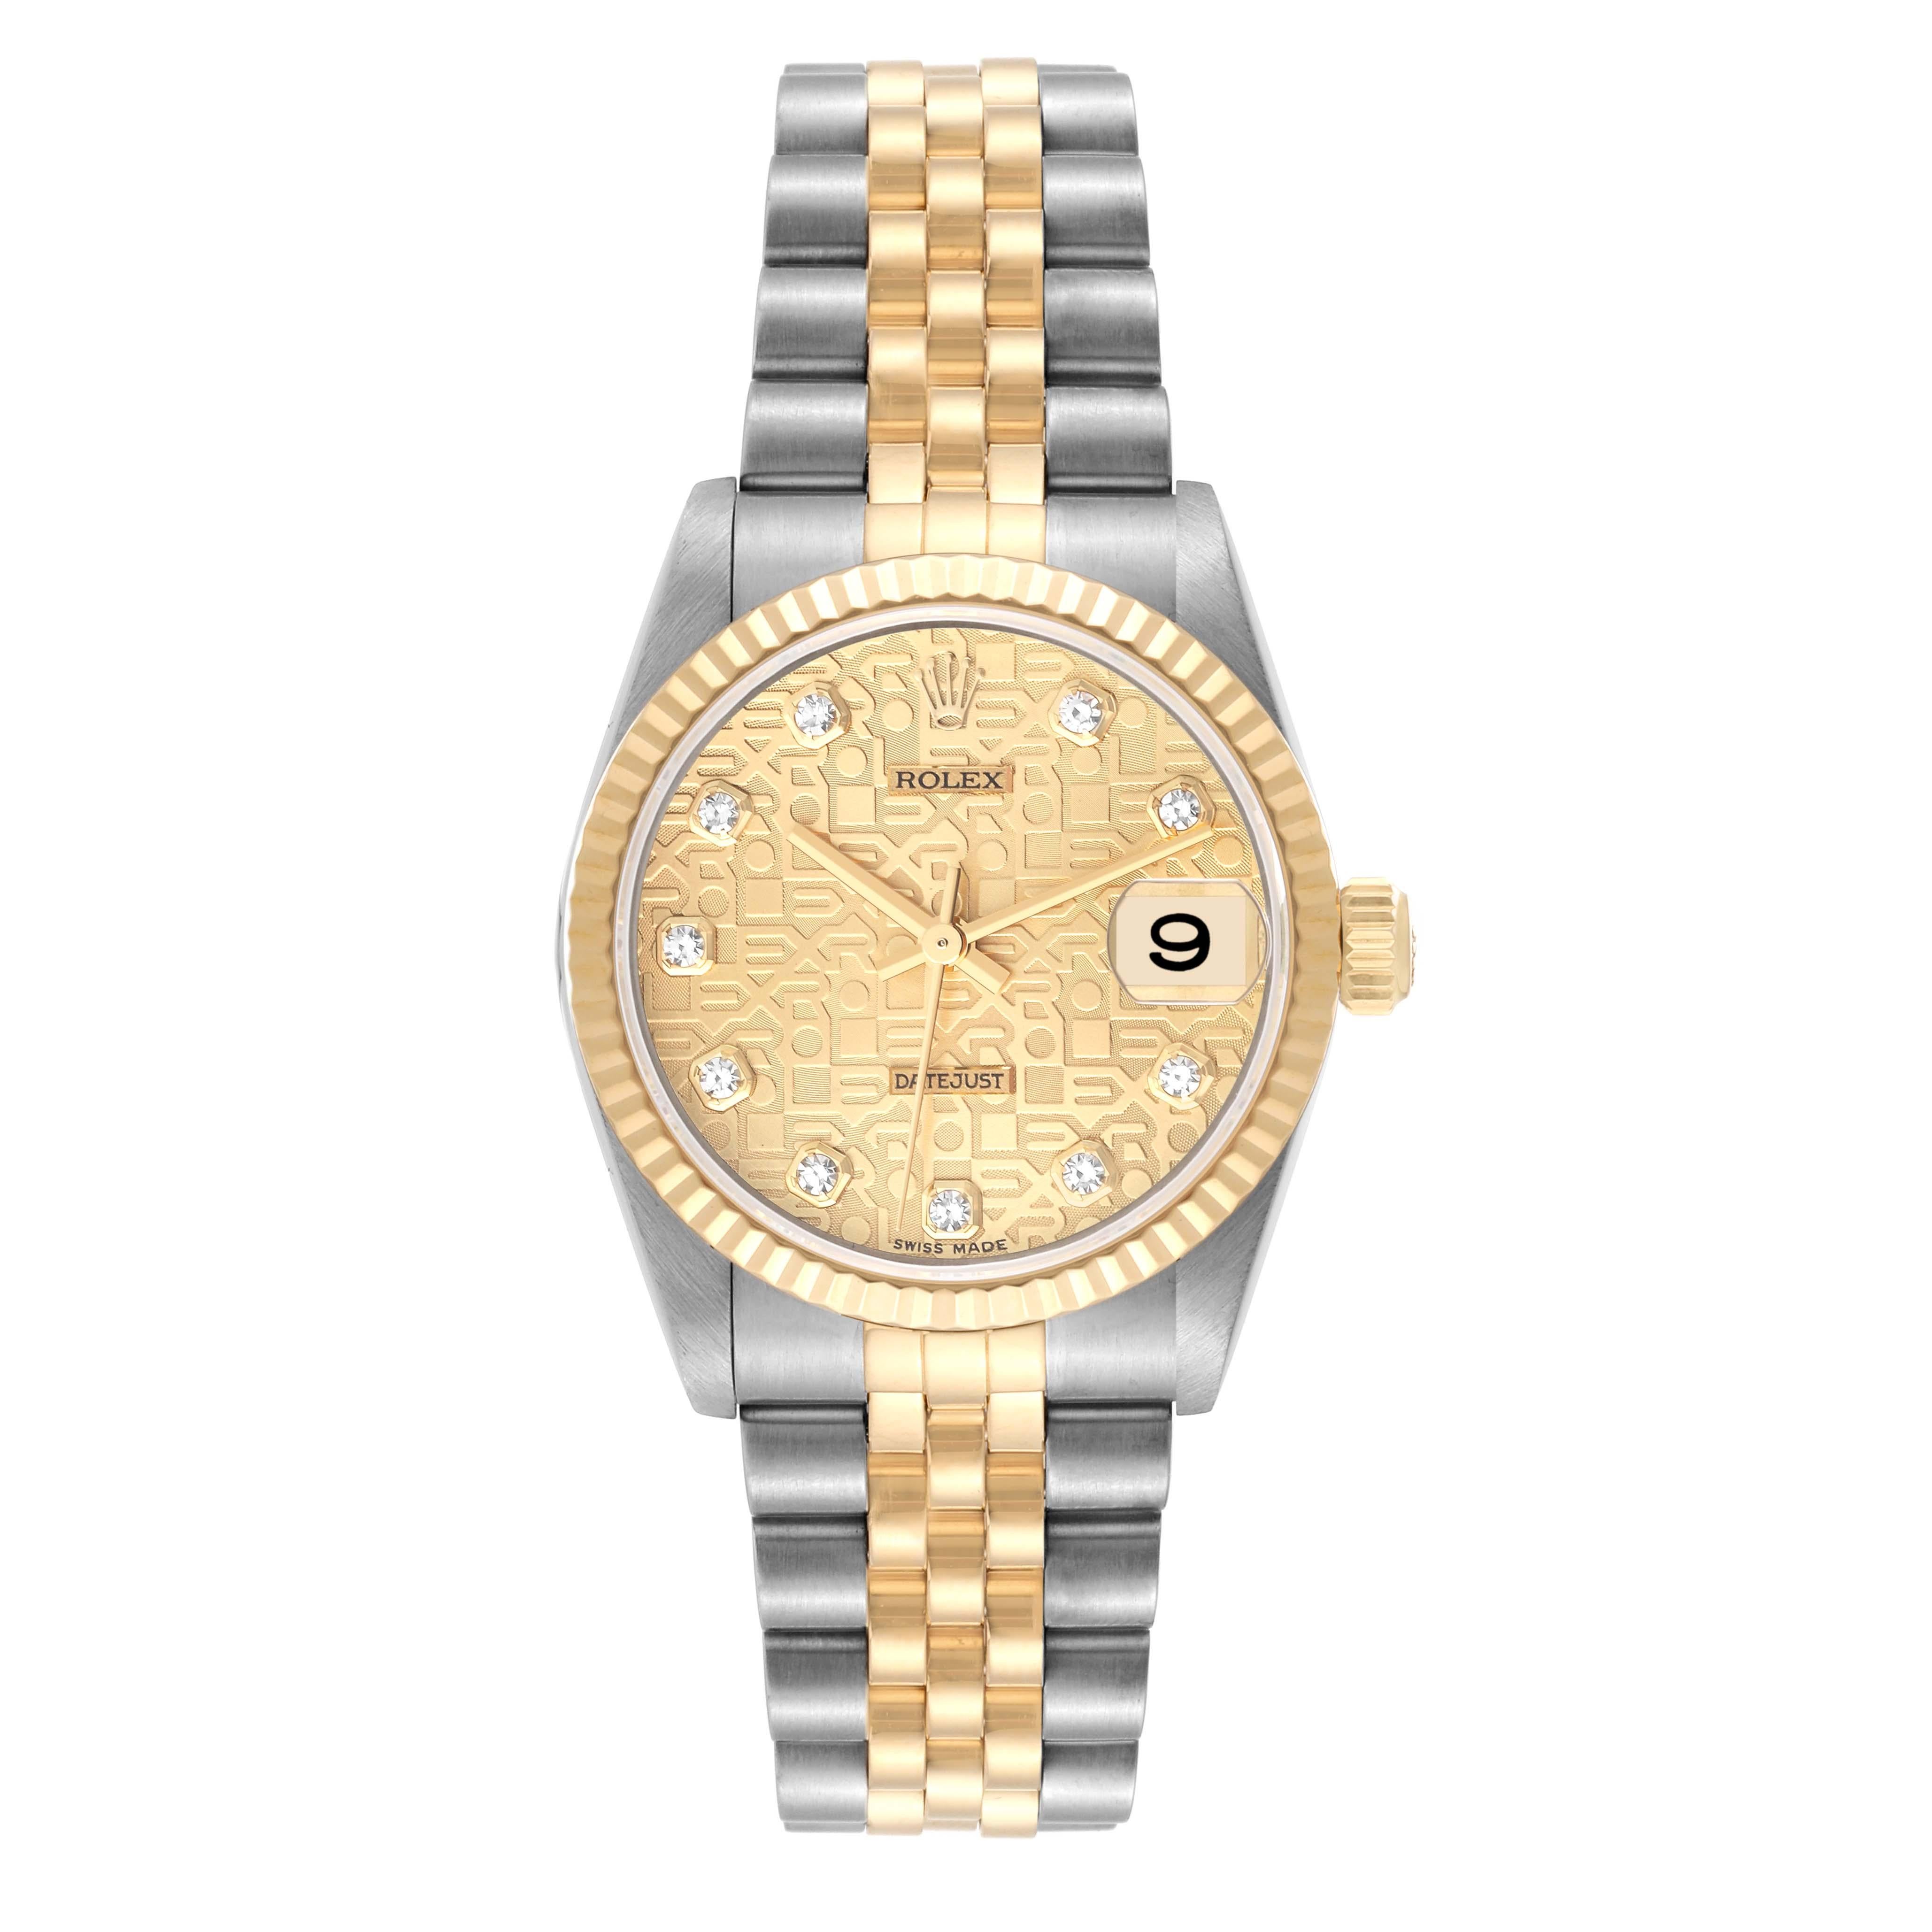 Rolex Datejust Midsize 31 Steel Yellow Gold Diamond Ladies Watch 78273. Officially certified chronometer self-winding movement. Stainless steel oyster case 31 mm in diameter. Rolex logo on an 18K yellow gold crown. 18k yellow gold fluted bezel.